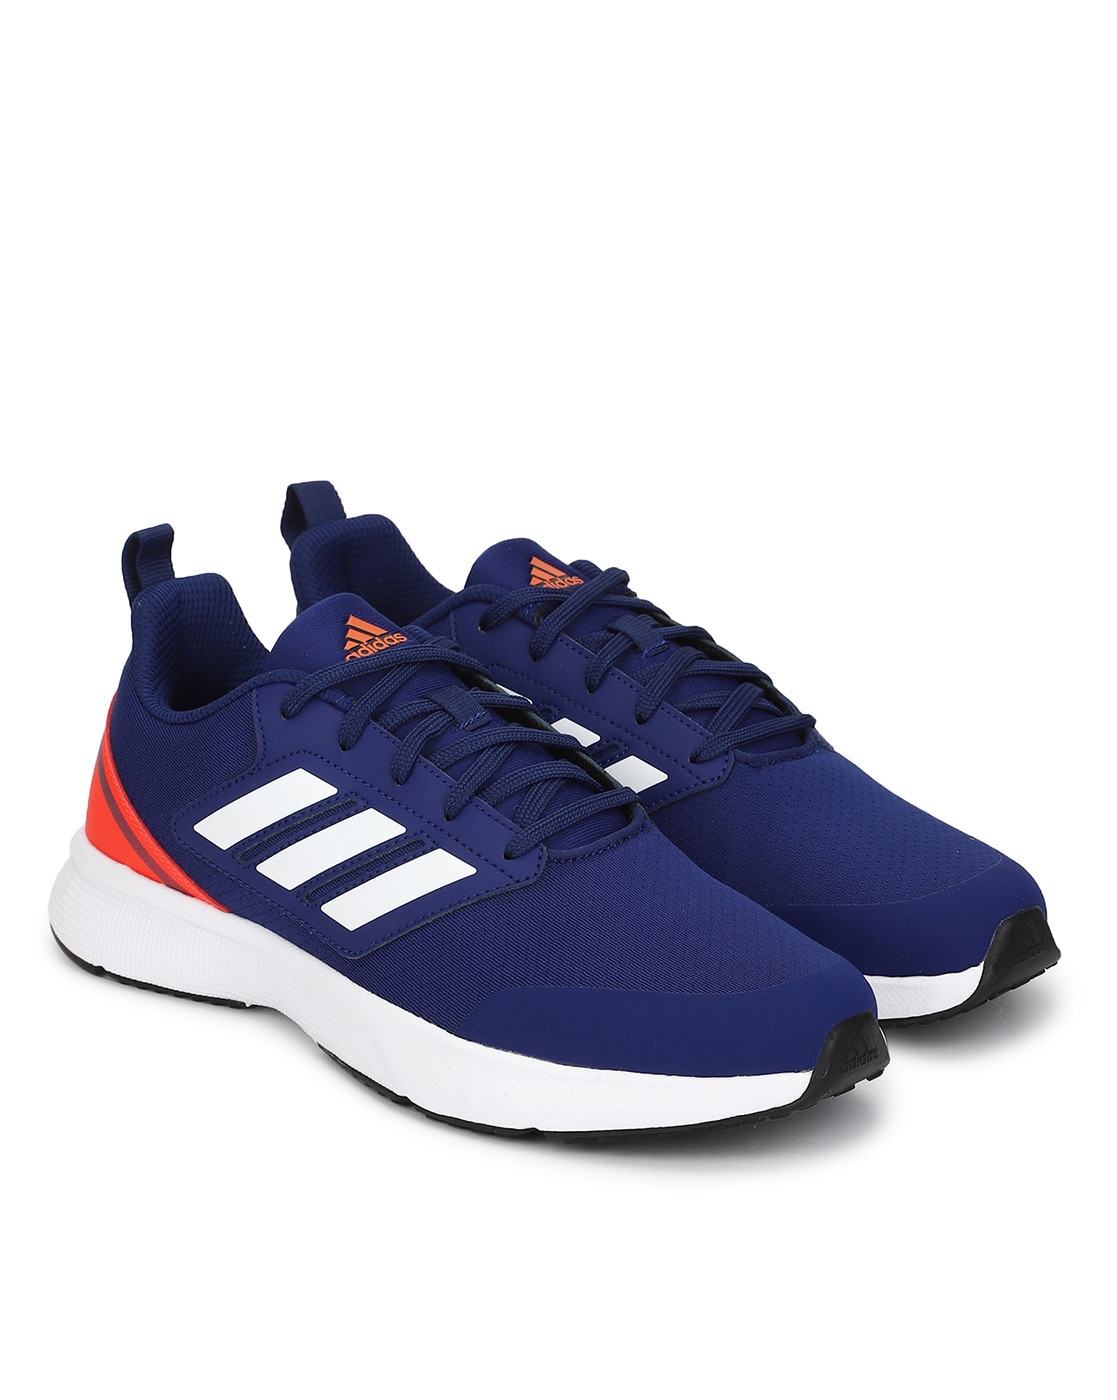 Discover 180+ flipkart shoes adidas sneakers